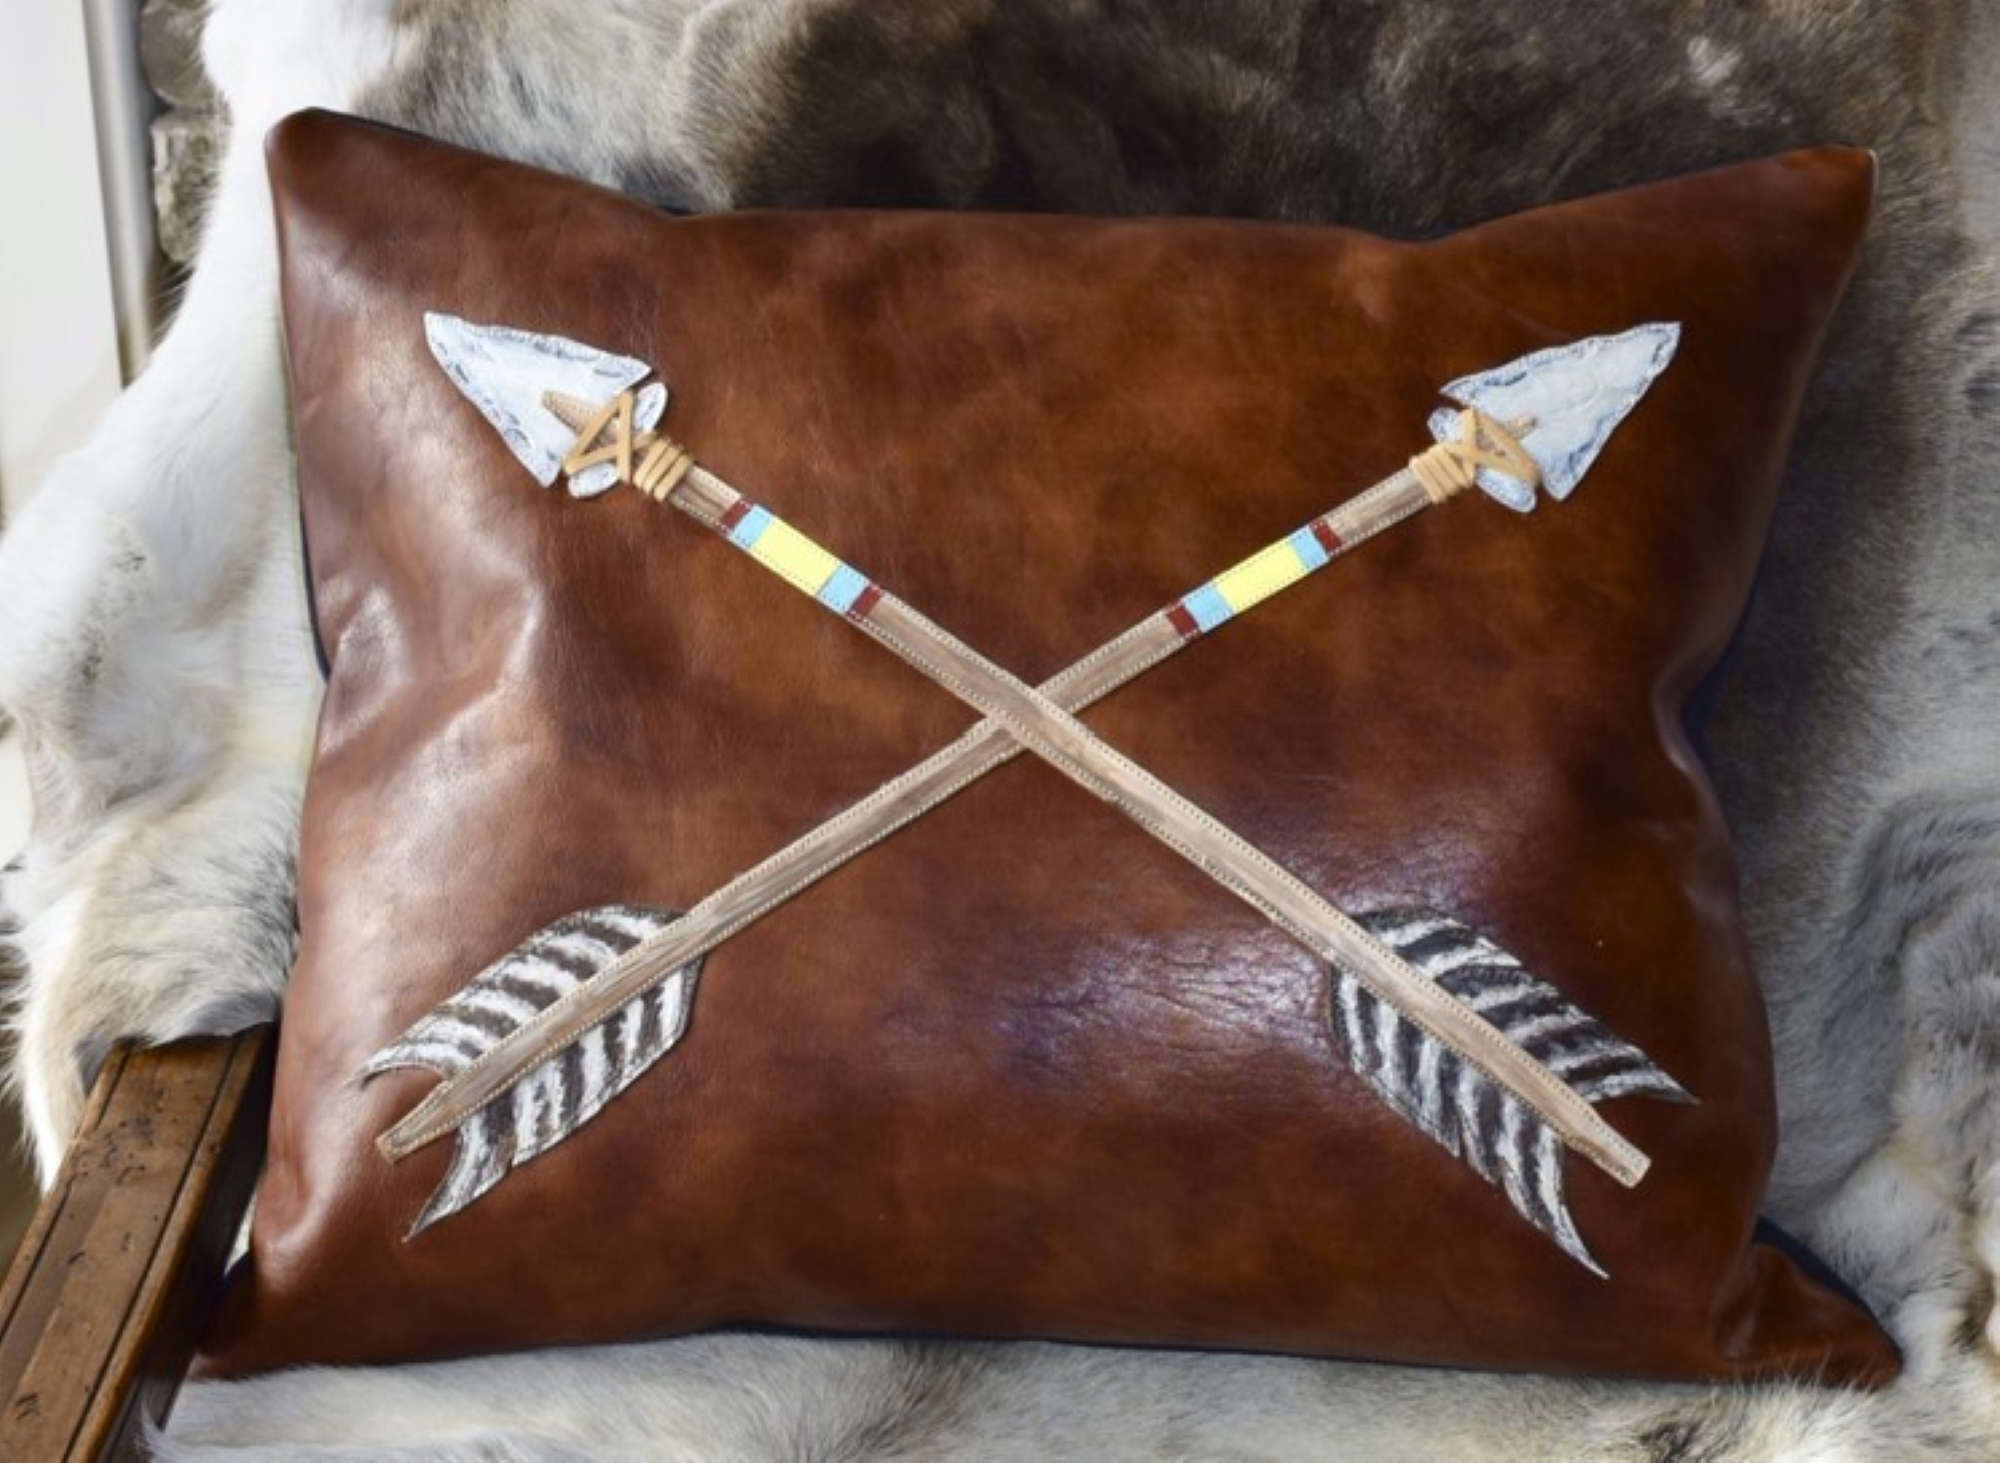 This leather pillow hand-appliquéd by BRIDGERHome artist Jenny Keller is an example of the handcrafted functional art available to purchase at the Western Design Conference Exhibit + Sale.